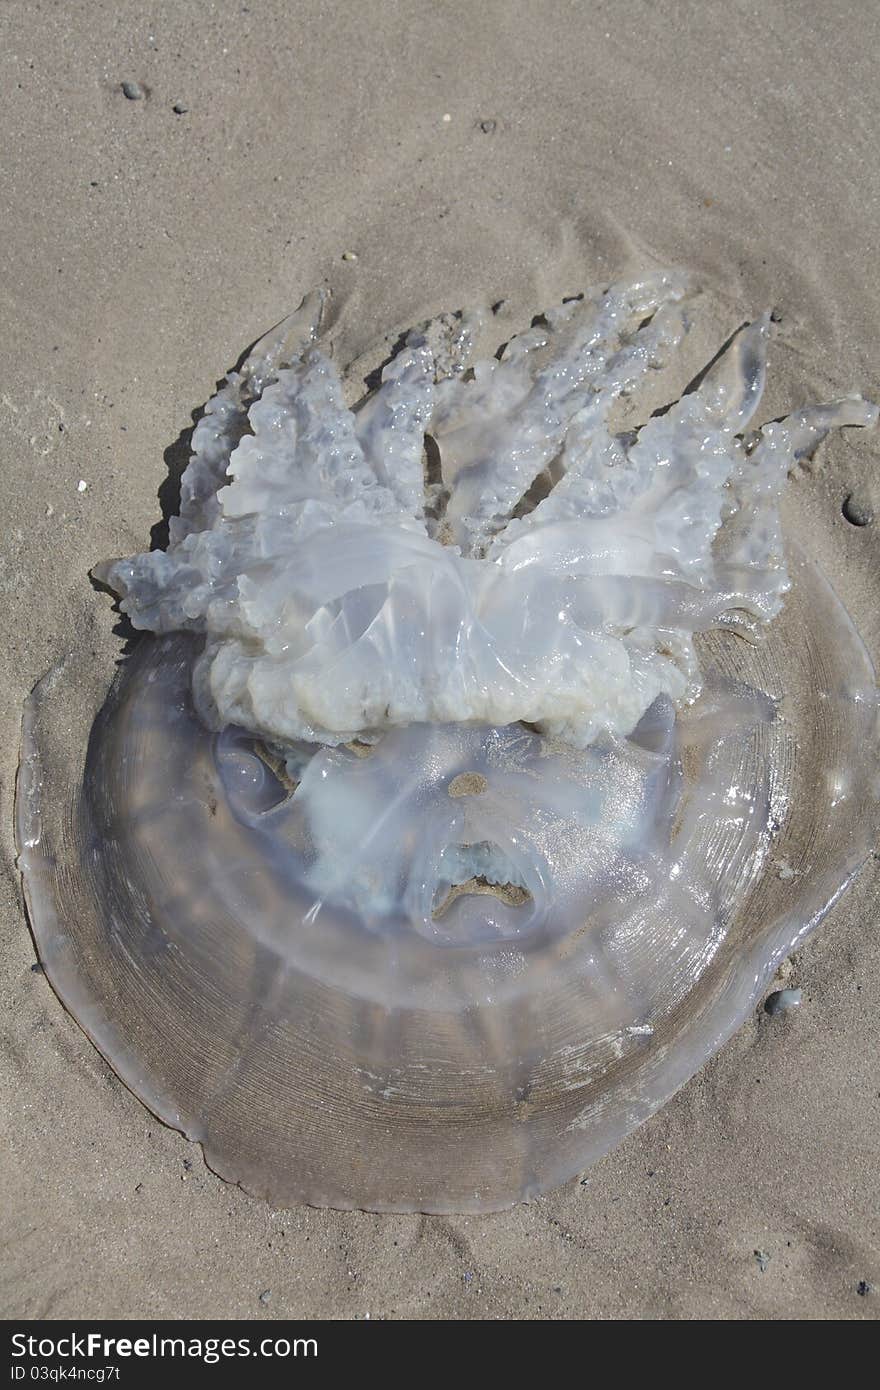 Beached Moon jellyfish with sad looking face on sand.